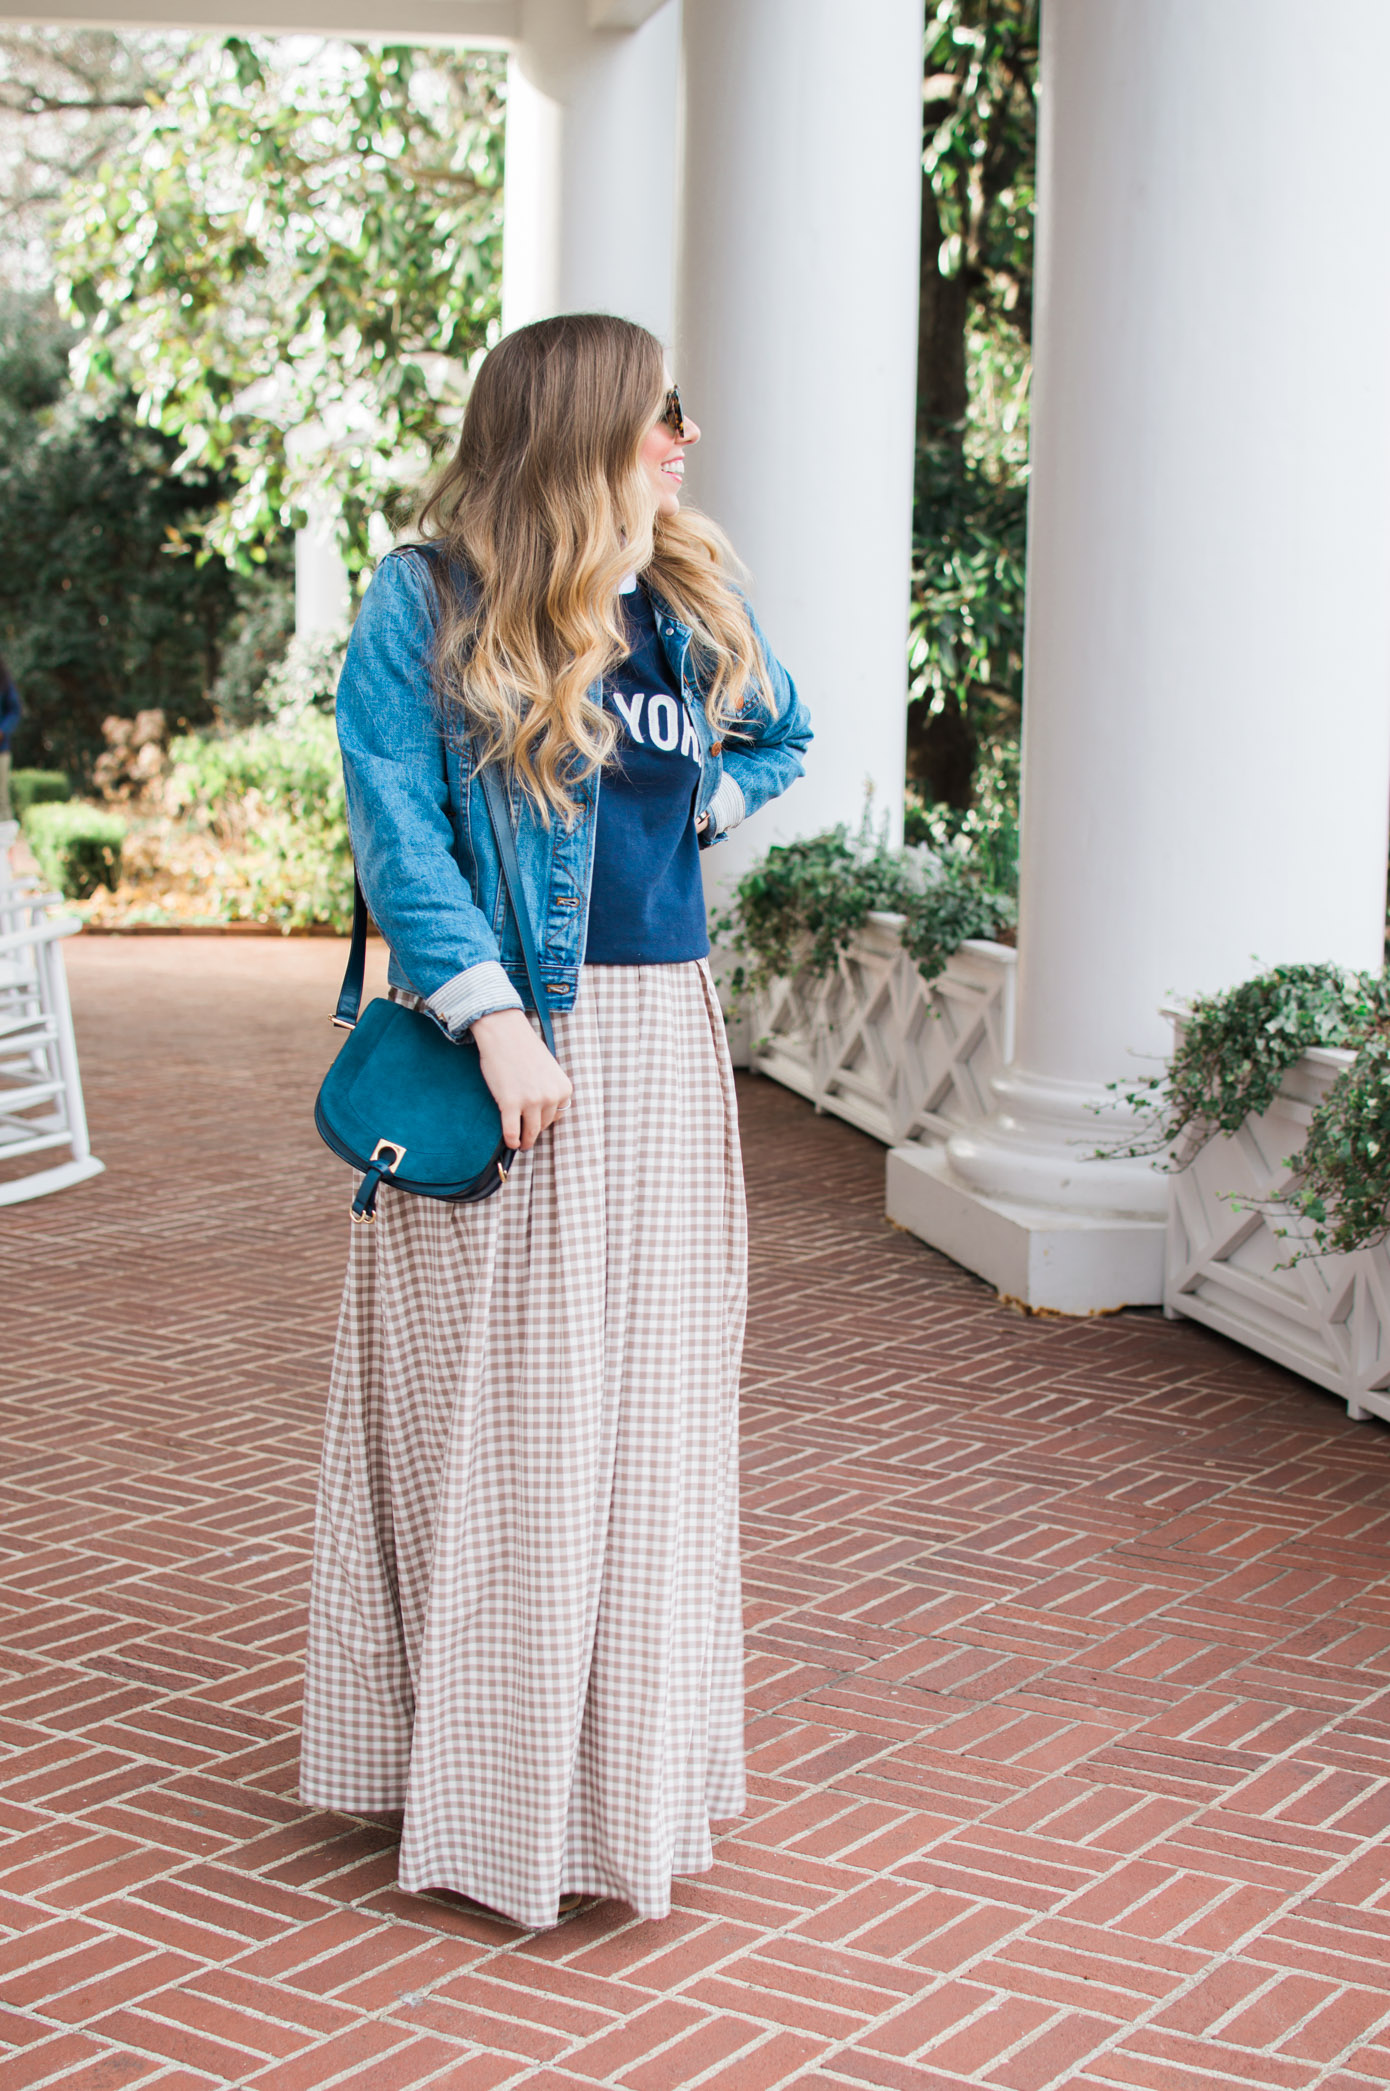 How to Style a Maxi Skirt for Winter | Casual Maxi Skirt | Louella Reese Life & Style Blog